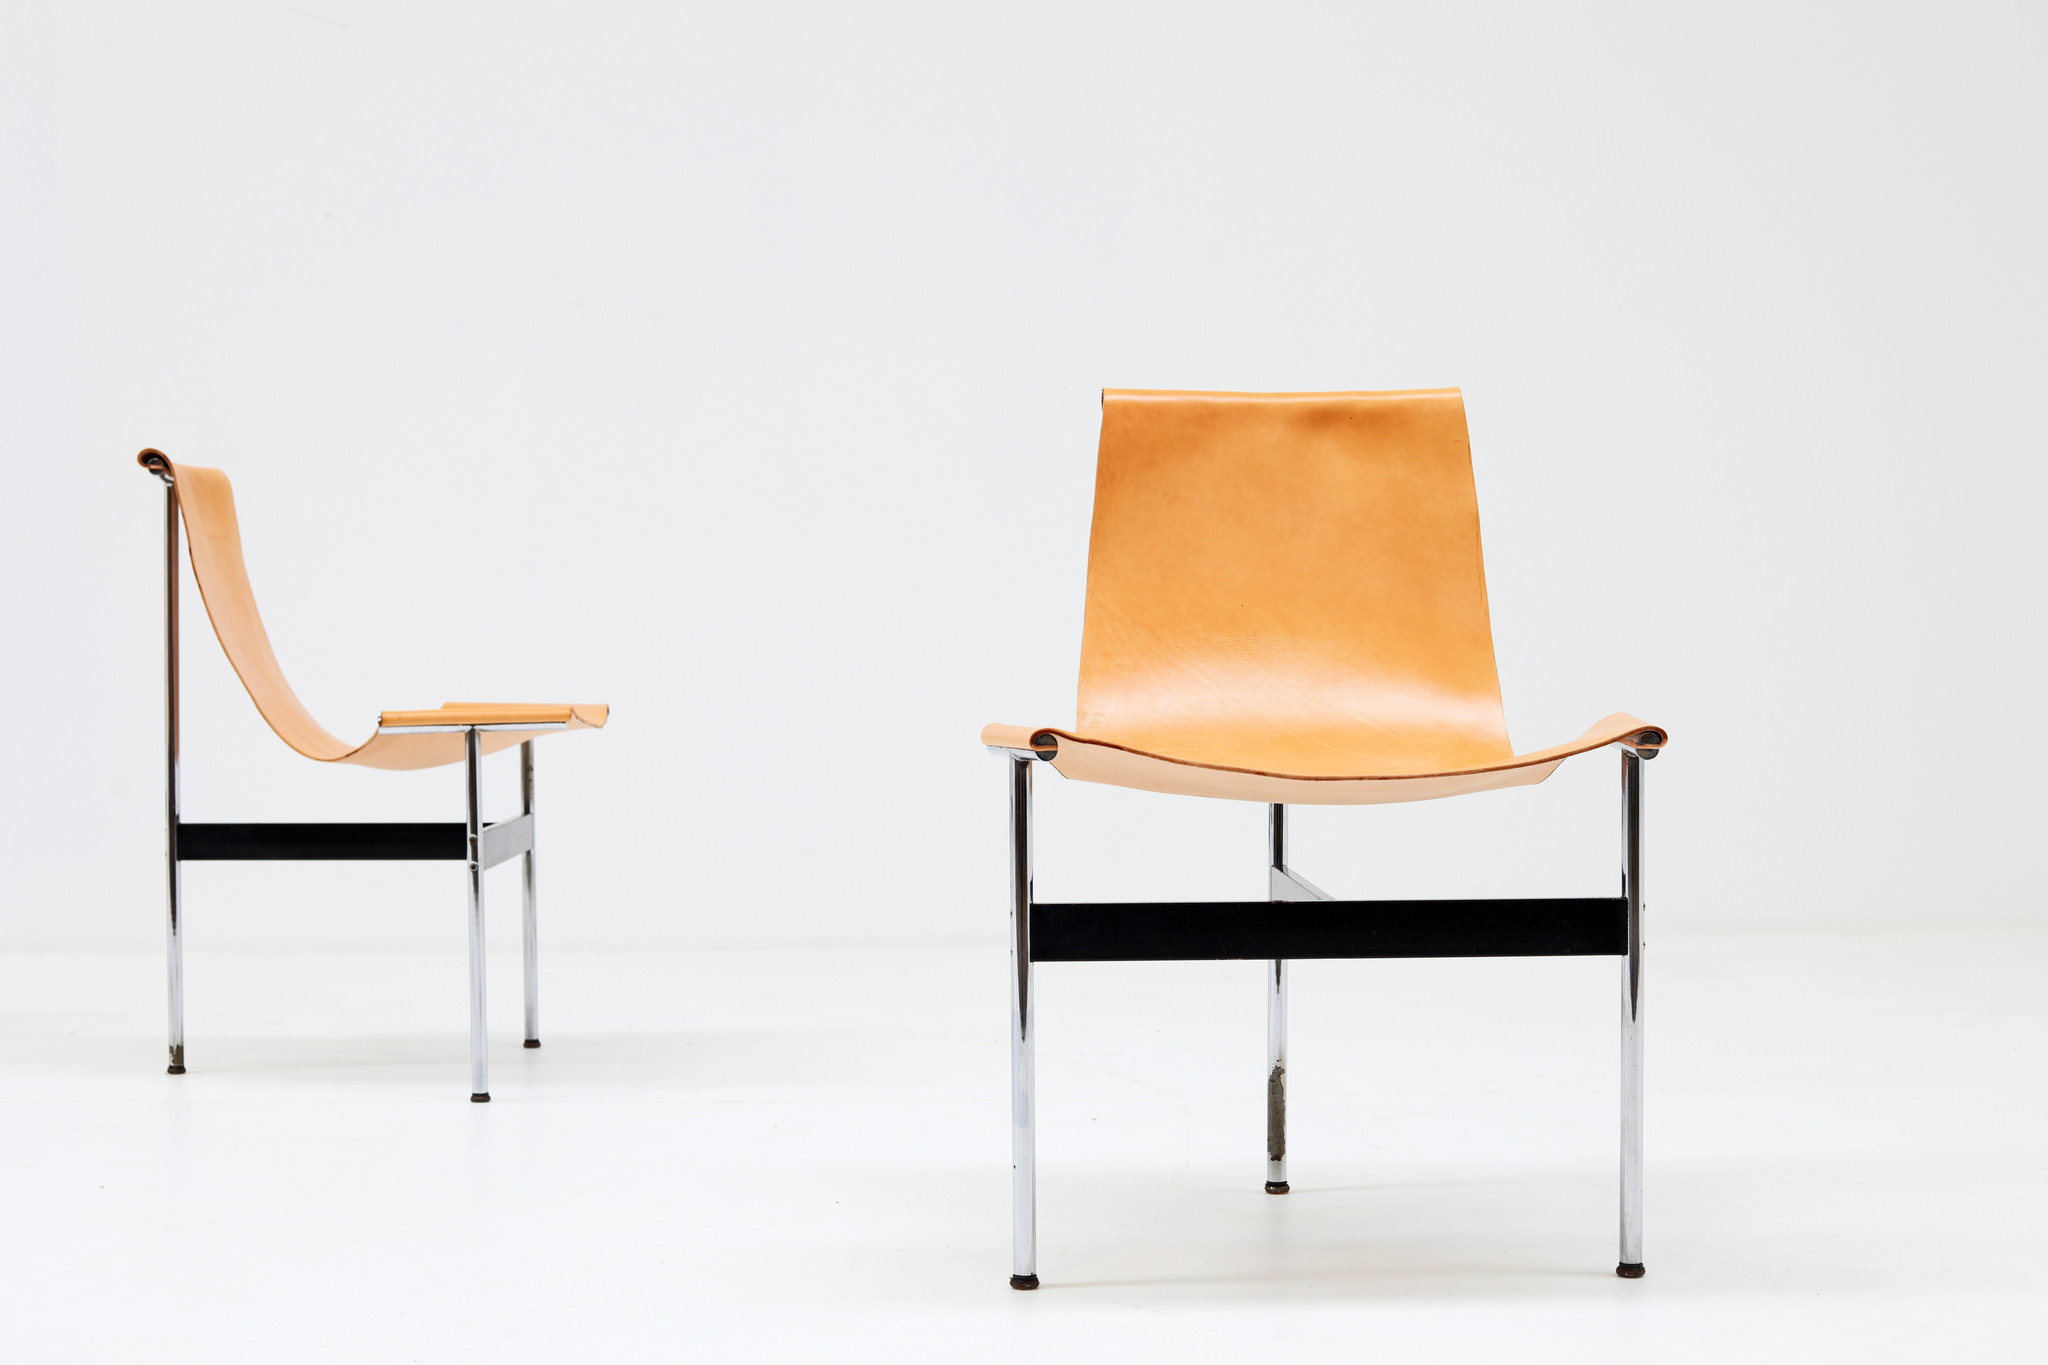 T-Chair by Katavolos, Littell and Kelley 1952